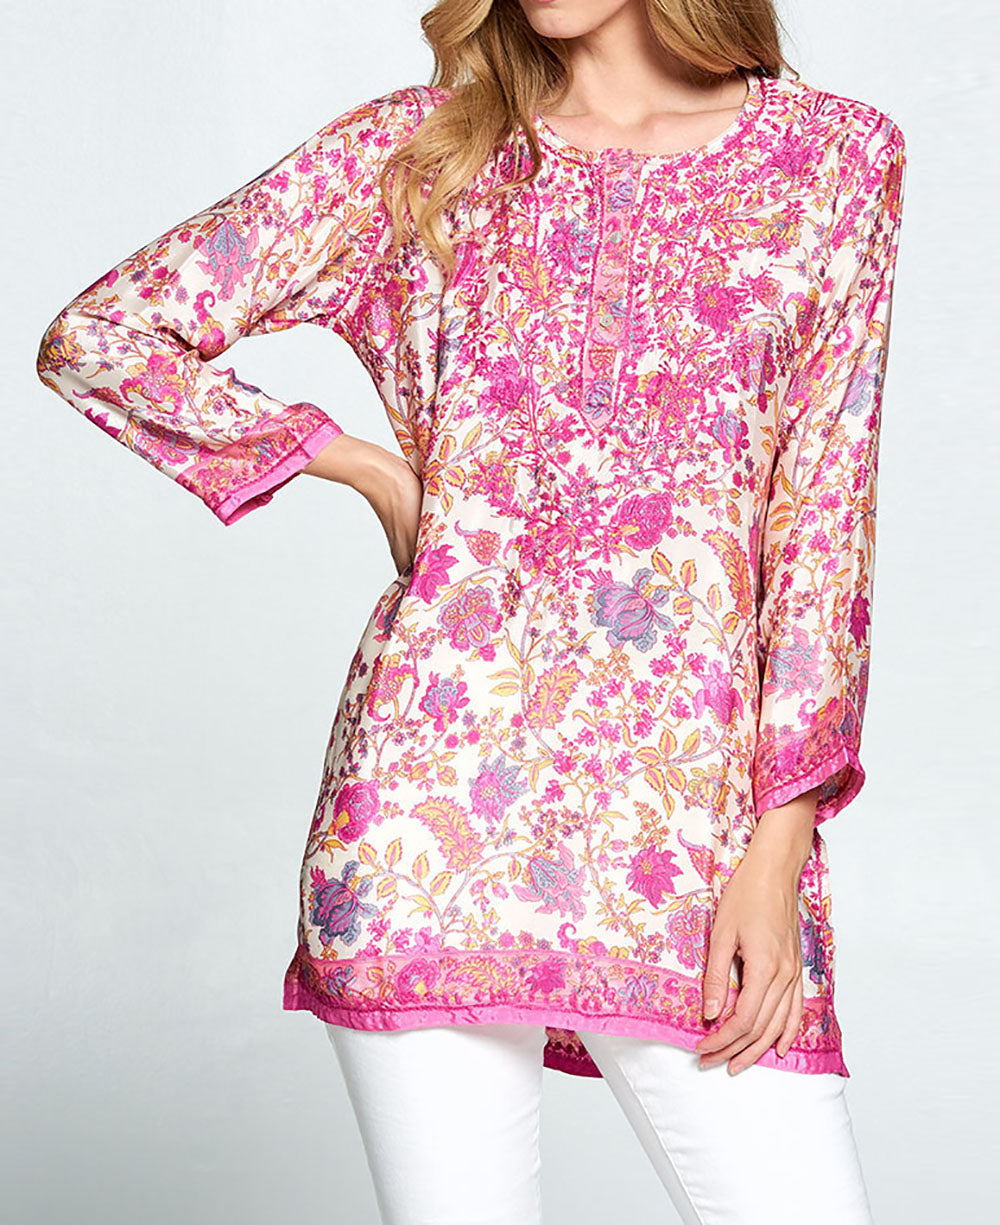 Embroidered Floral Shefali Tunic, India – Cultural Elements